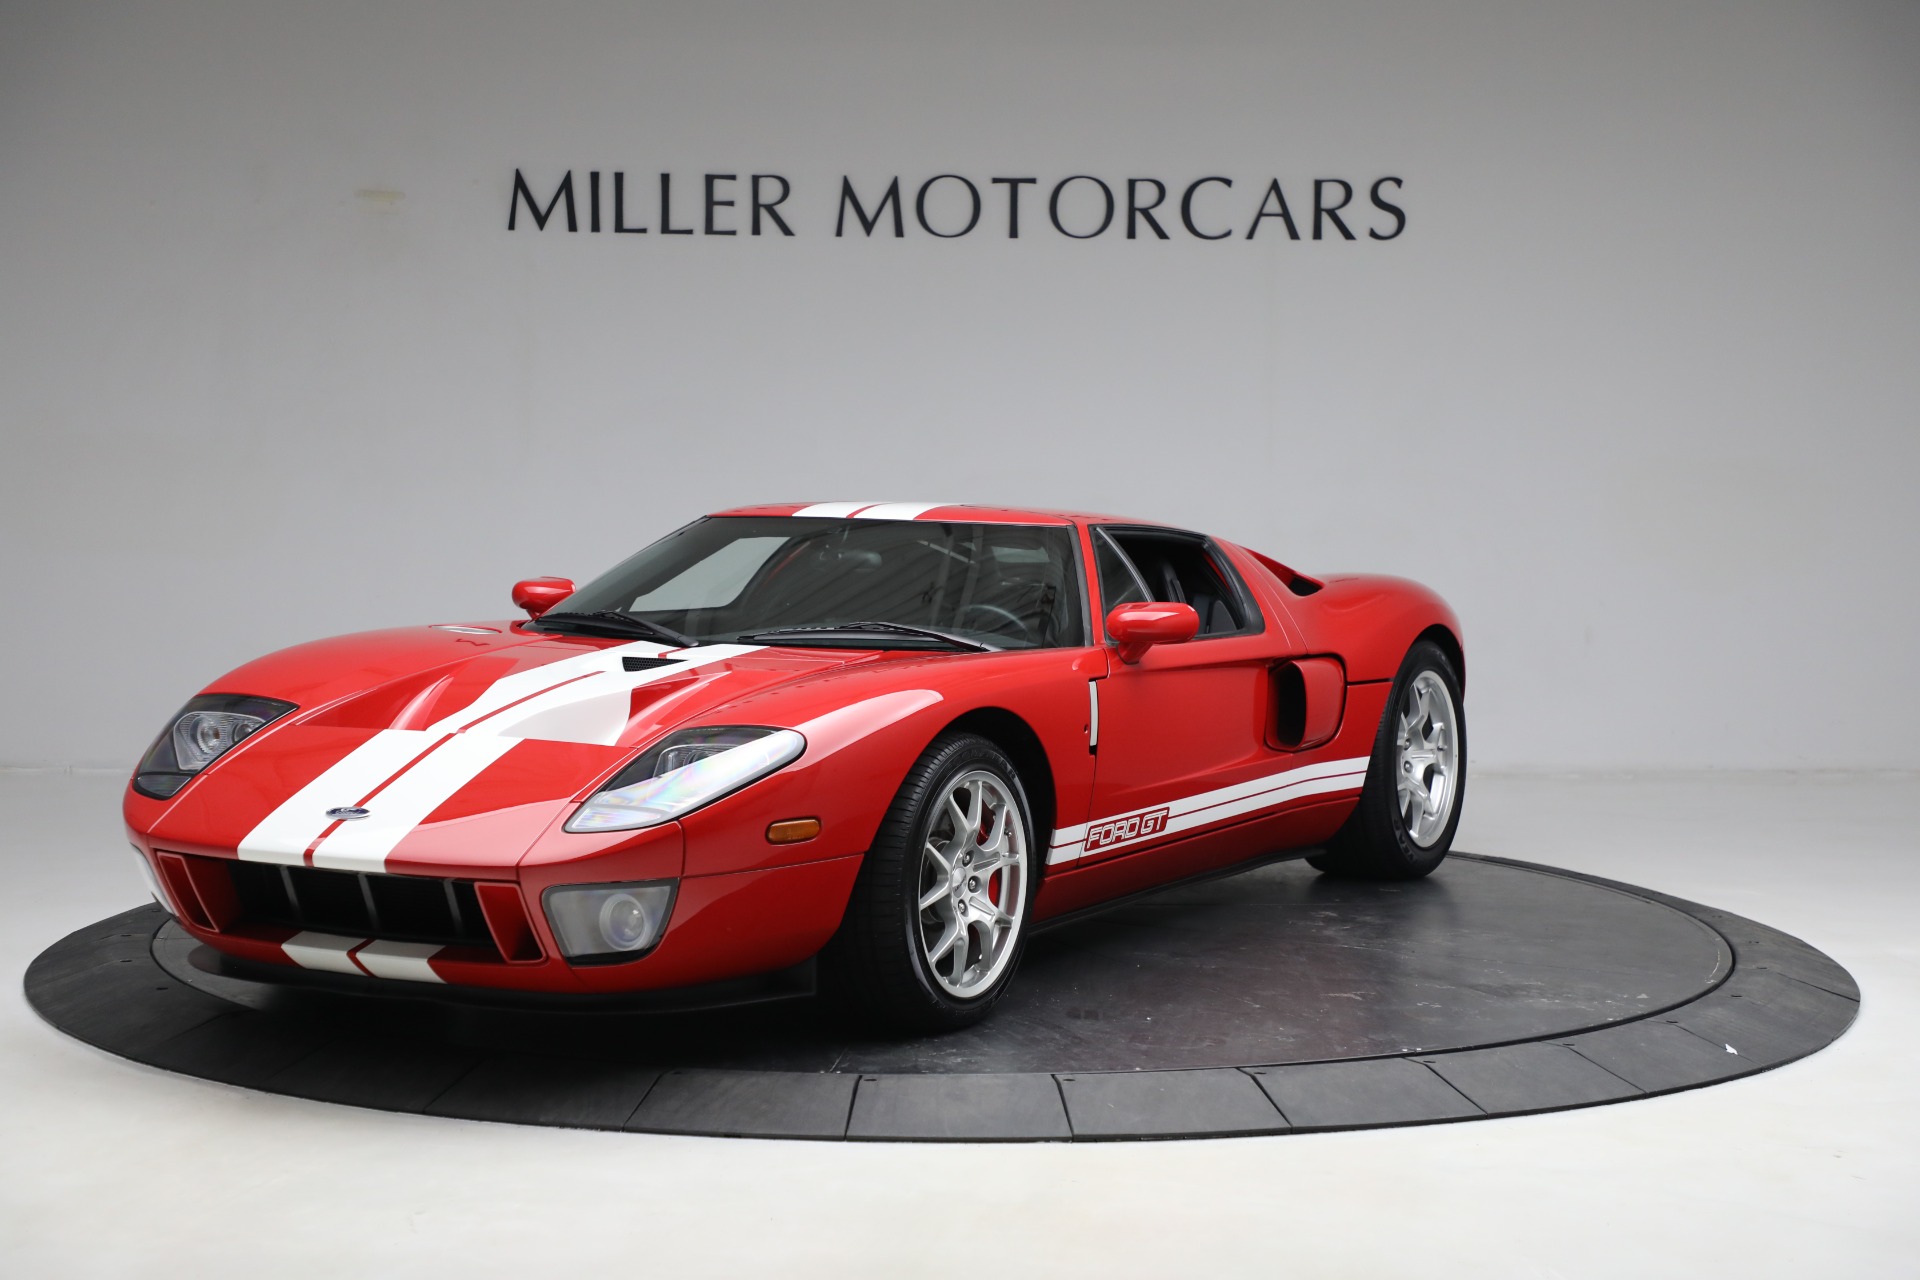 Used 2006 Ford GT for sale $425,900 at Bentley Greenwich in Greenwich CT 06830 1